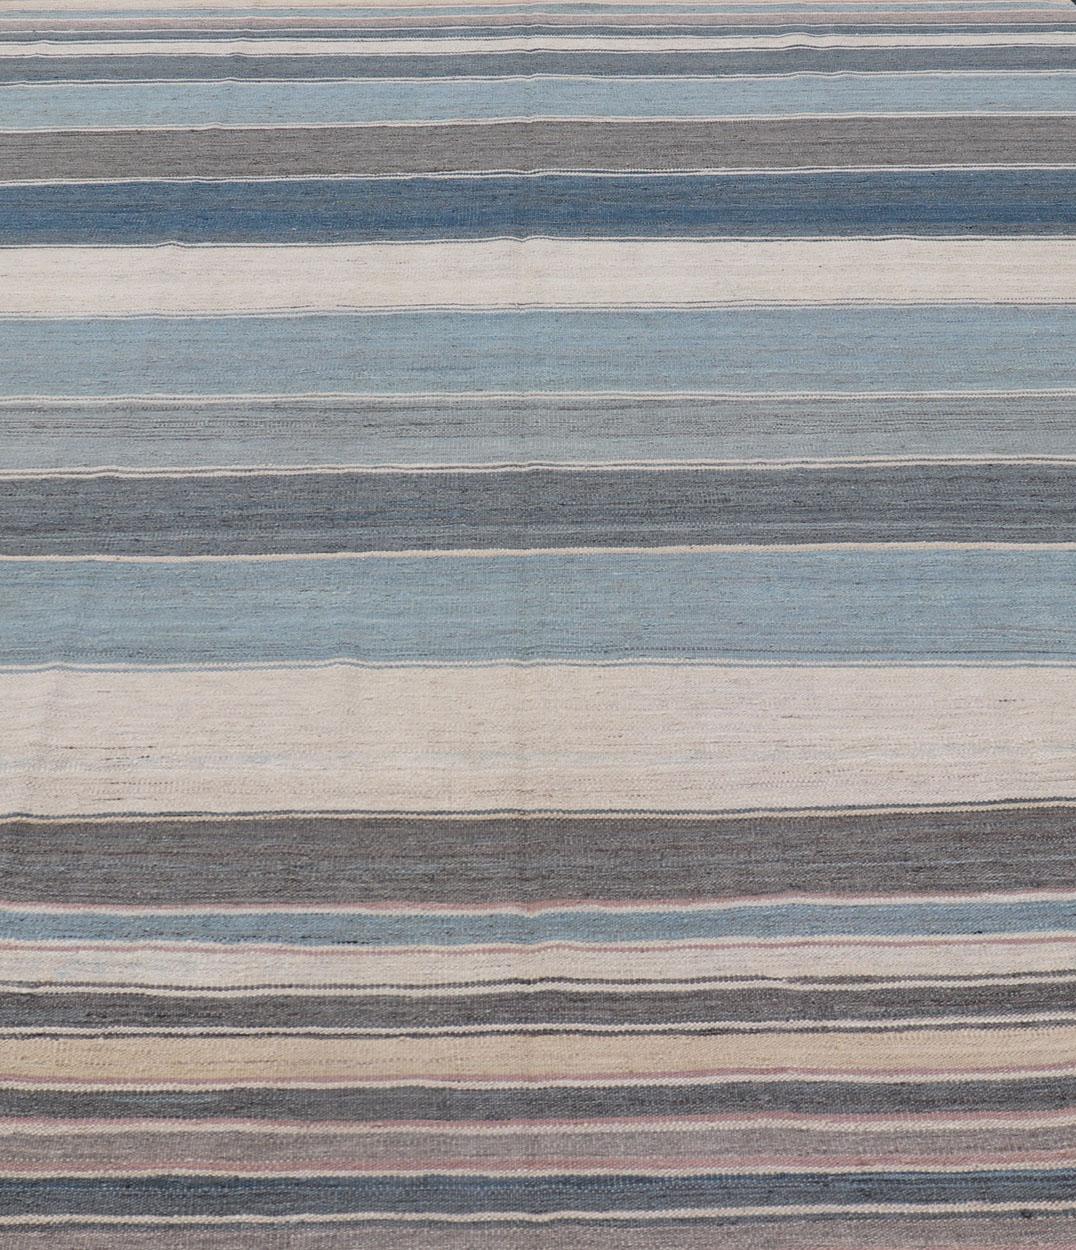 Hand-Woven Modern Kilim Rug in Shades of steel Blue, Teal, Brown, Light Gray and Cream For Sale